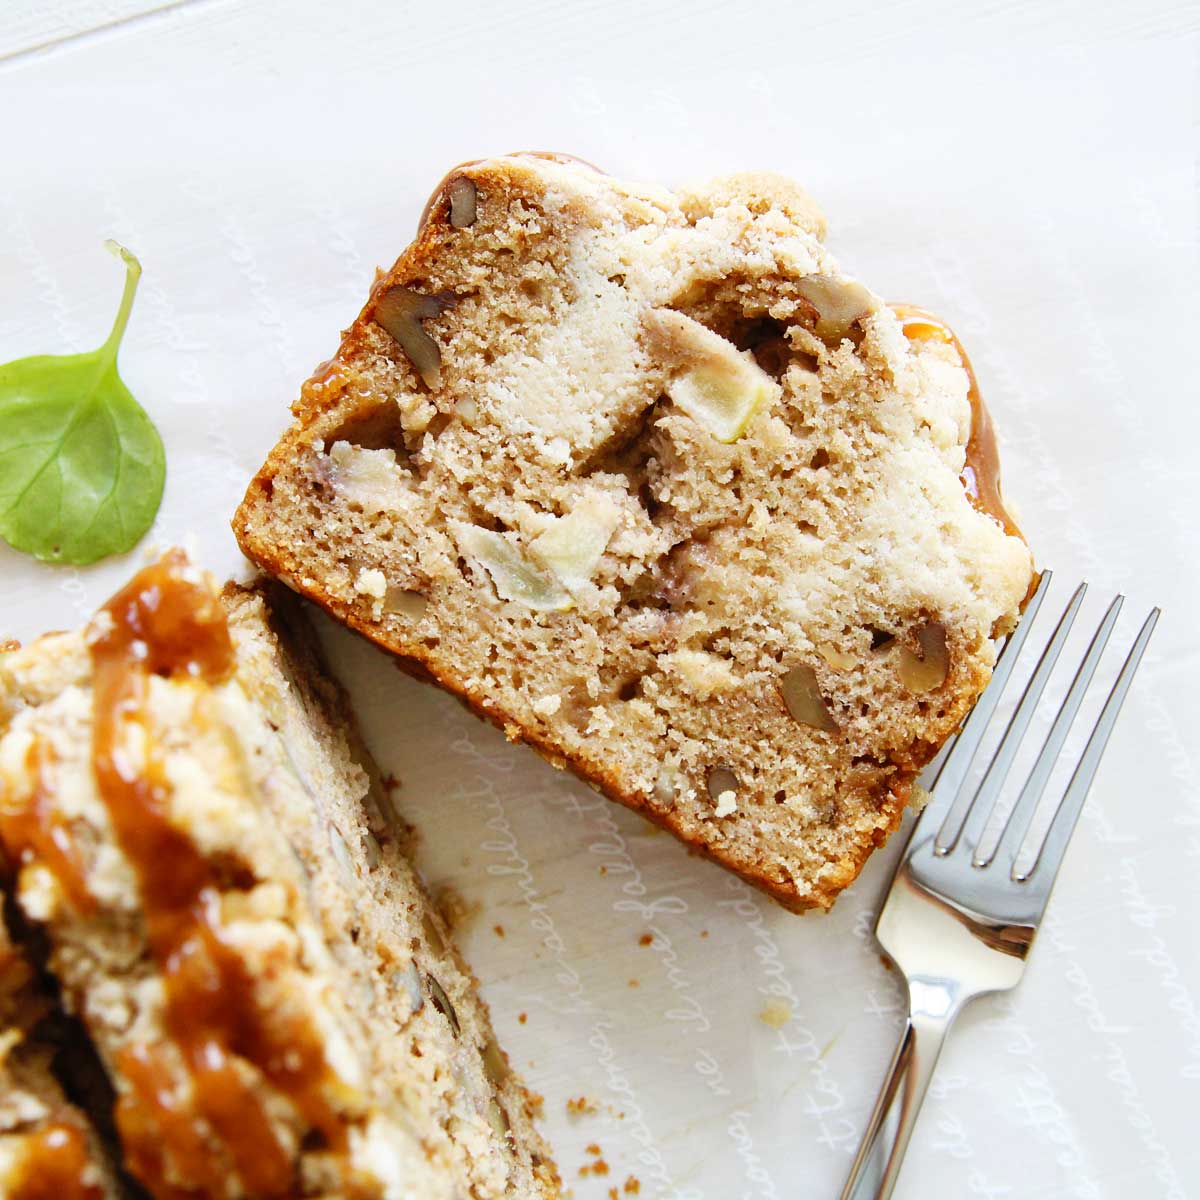 The Most Comforting Applesauce Banana Bread with Streusel Topping - Red Bean Mochi Cake